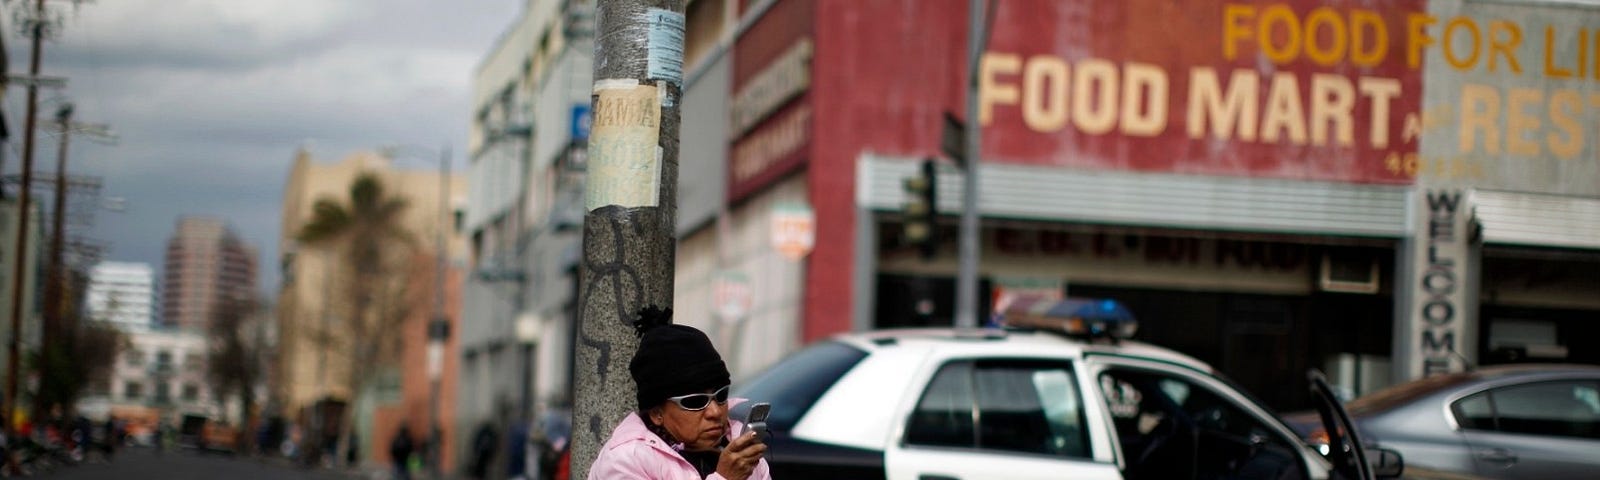 A woman uses a cell phone on downtown Los Angeles’ Skid Row, March 6, 2013. Photo by Lucy Nicholson/Reuters